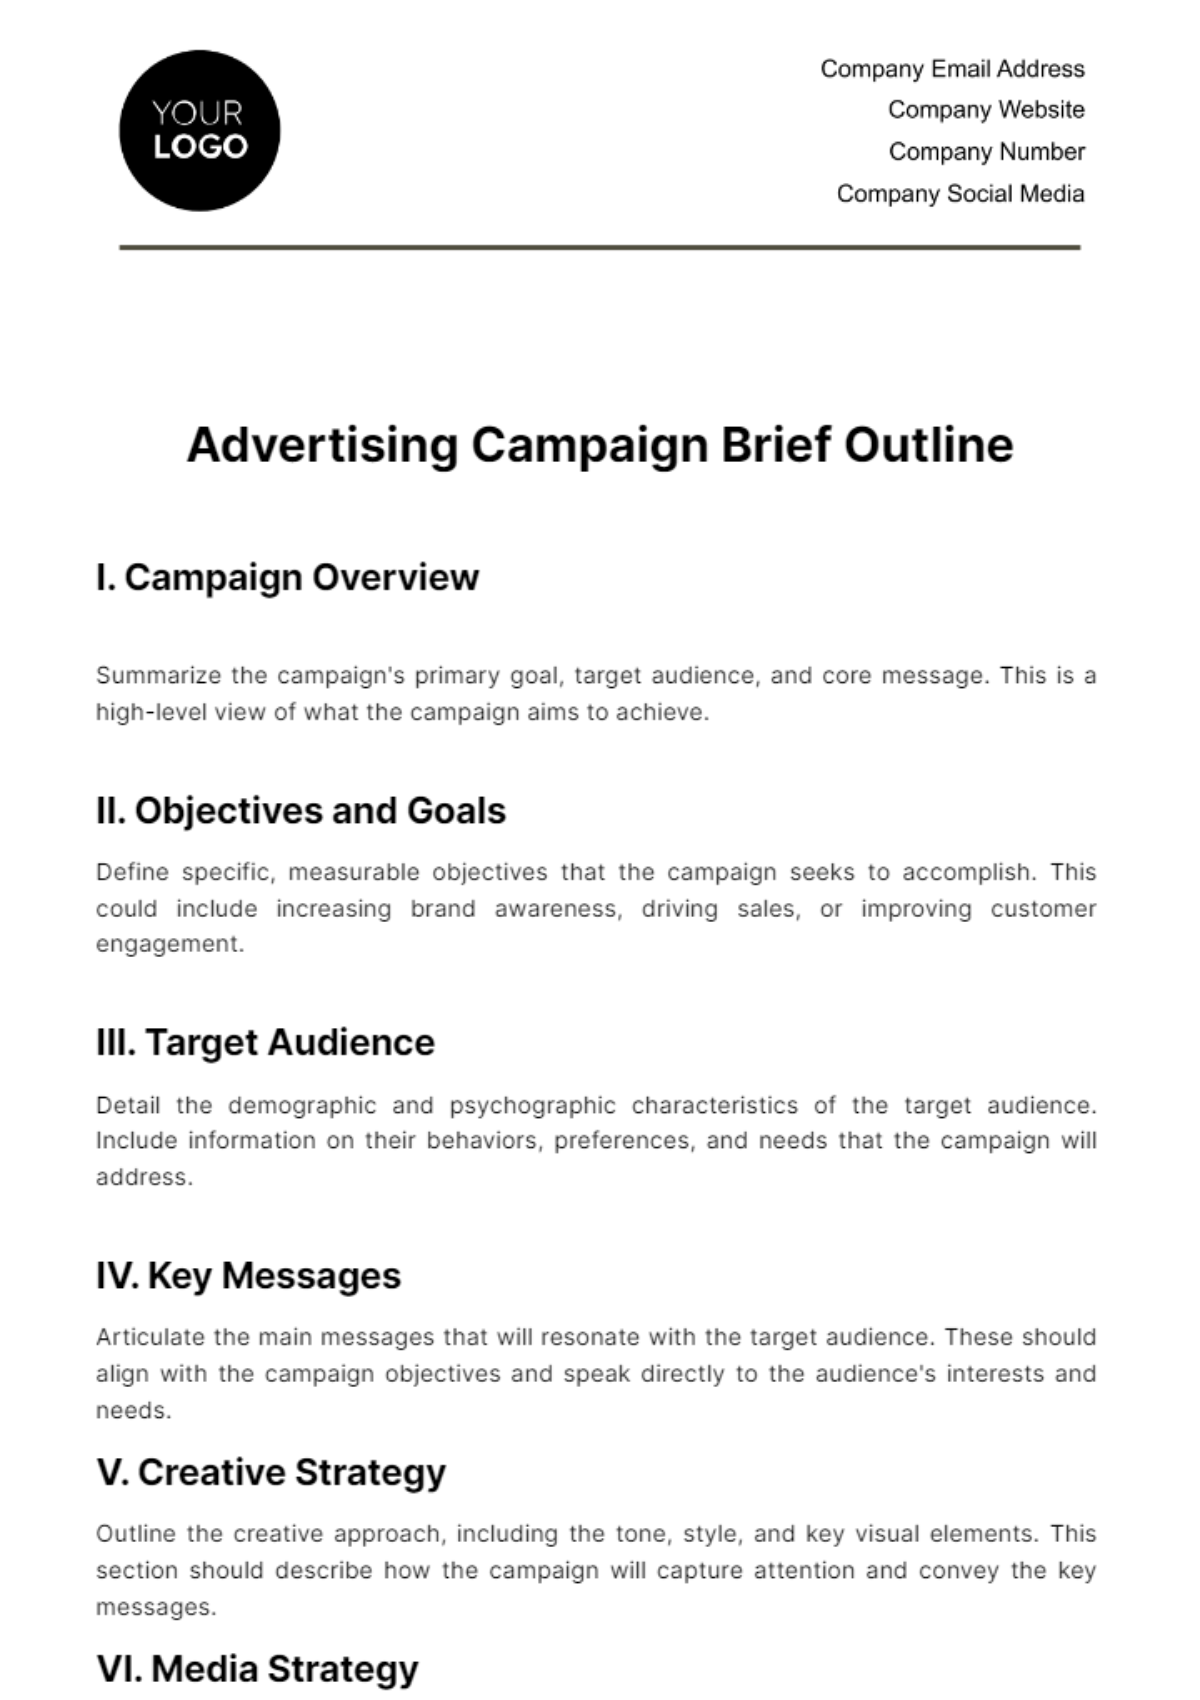 Free Advertising Campaign Brief Outline Template